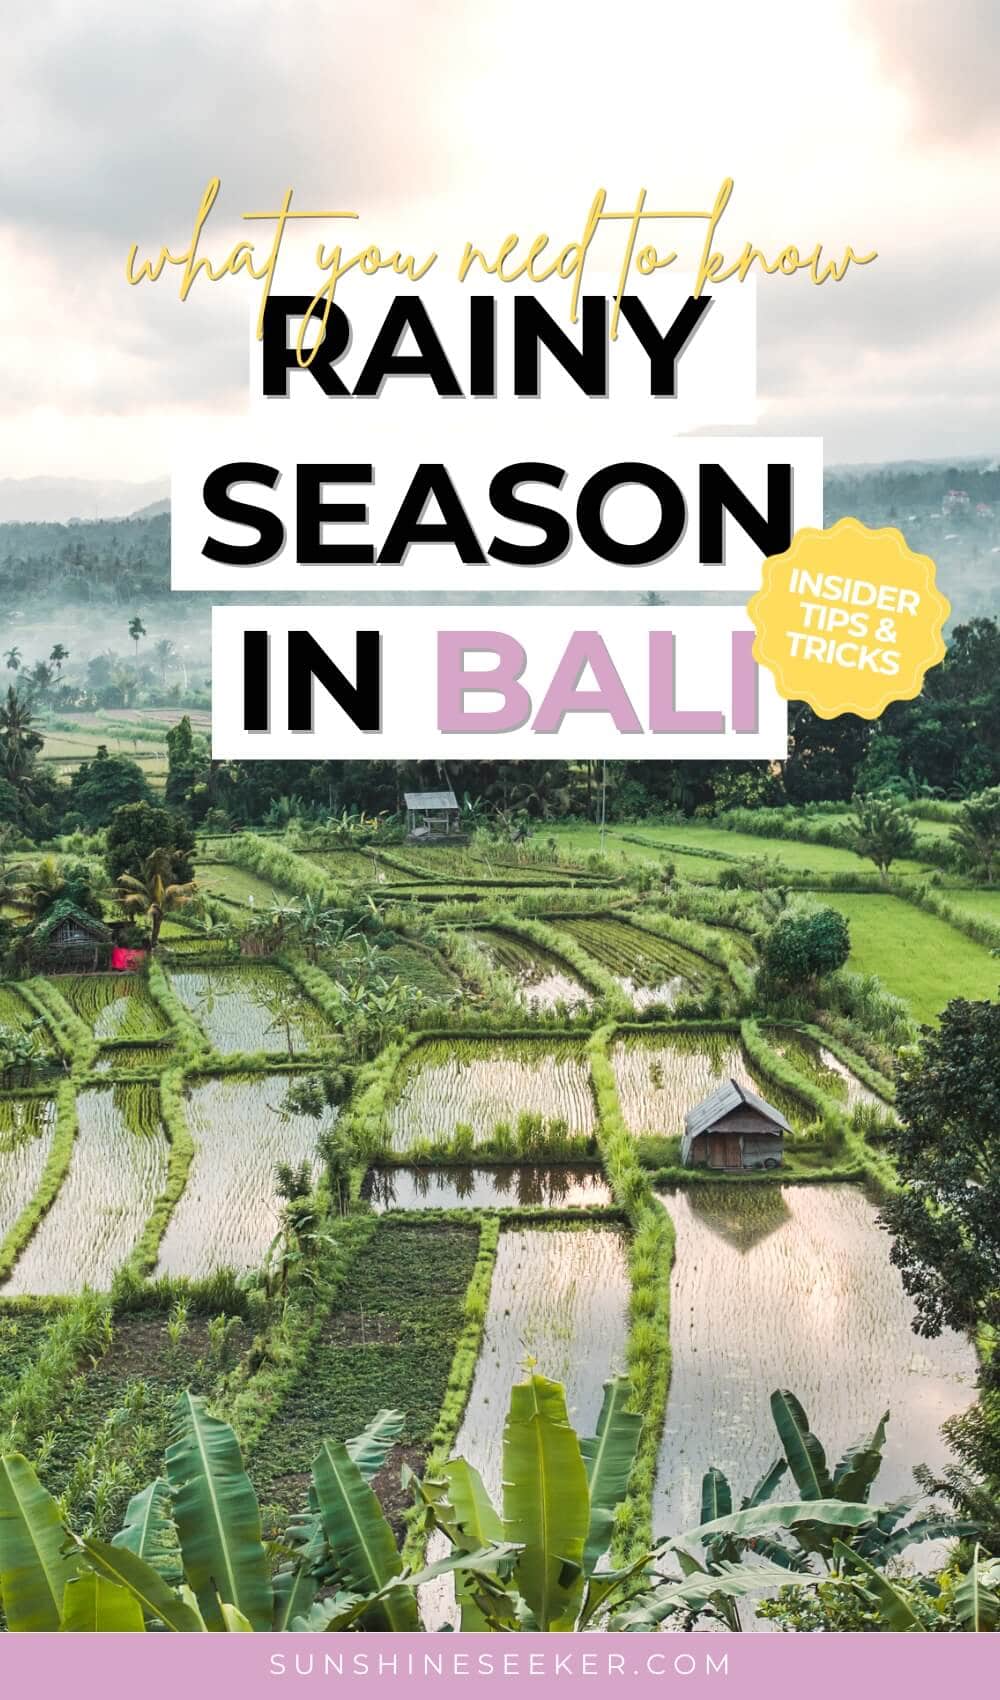 This is everything you need to know before visiting Bali during the rainy season. Where to stay, top things to do while it's raining and which months gets the most rain during the rainy season in Bali.